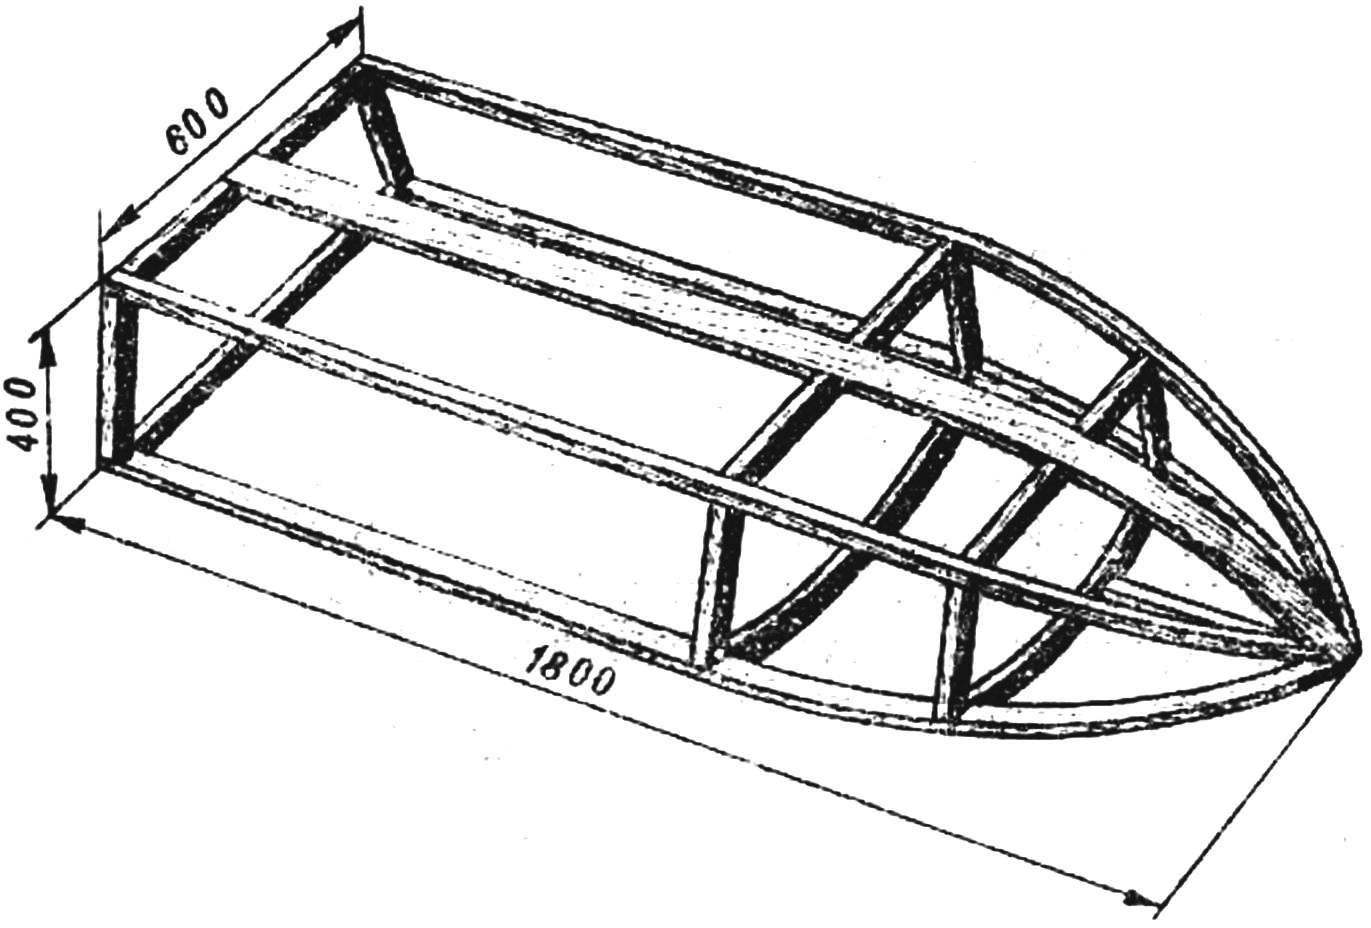 Fig. 1. The frame of the boat.